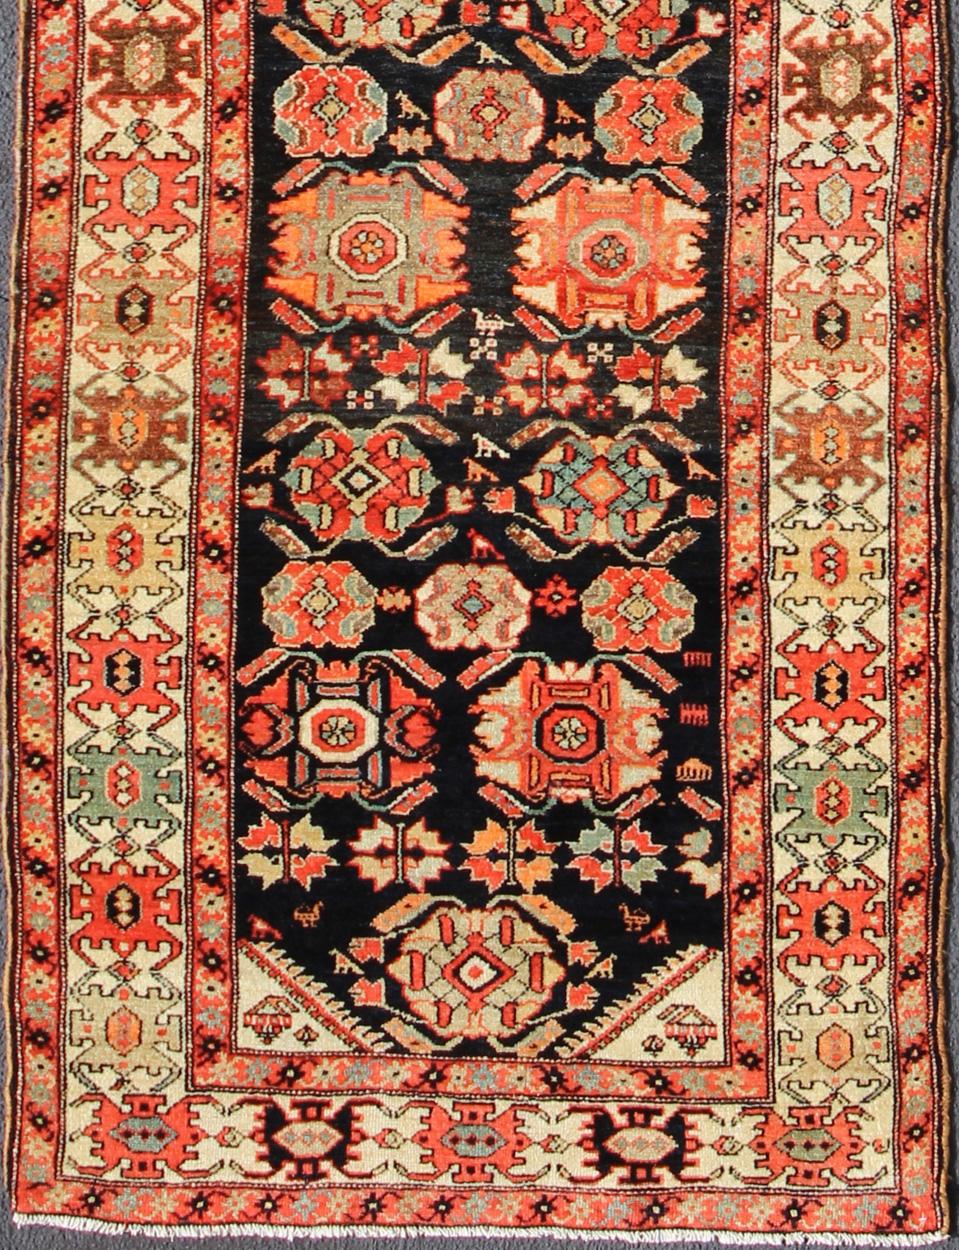 Orange and black antique Persian Malayer runner with Sub-geometric design, rug ema-7571, country of origin / type: Iran / Malayer, circa 1910.

This magnificent antique Persian Malayer runner (circa 1910) bears a beautiful, expansive, all-over Sub